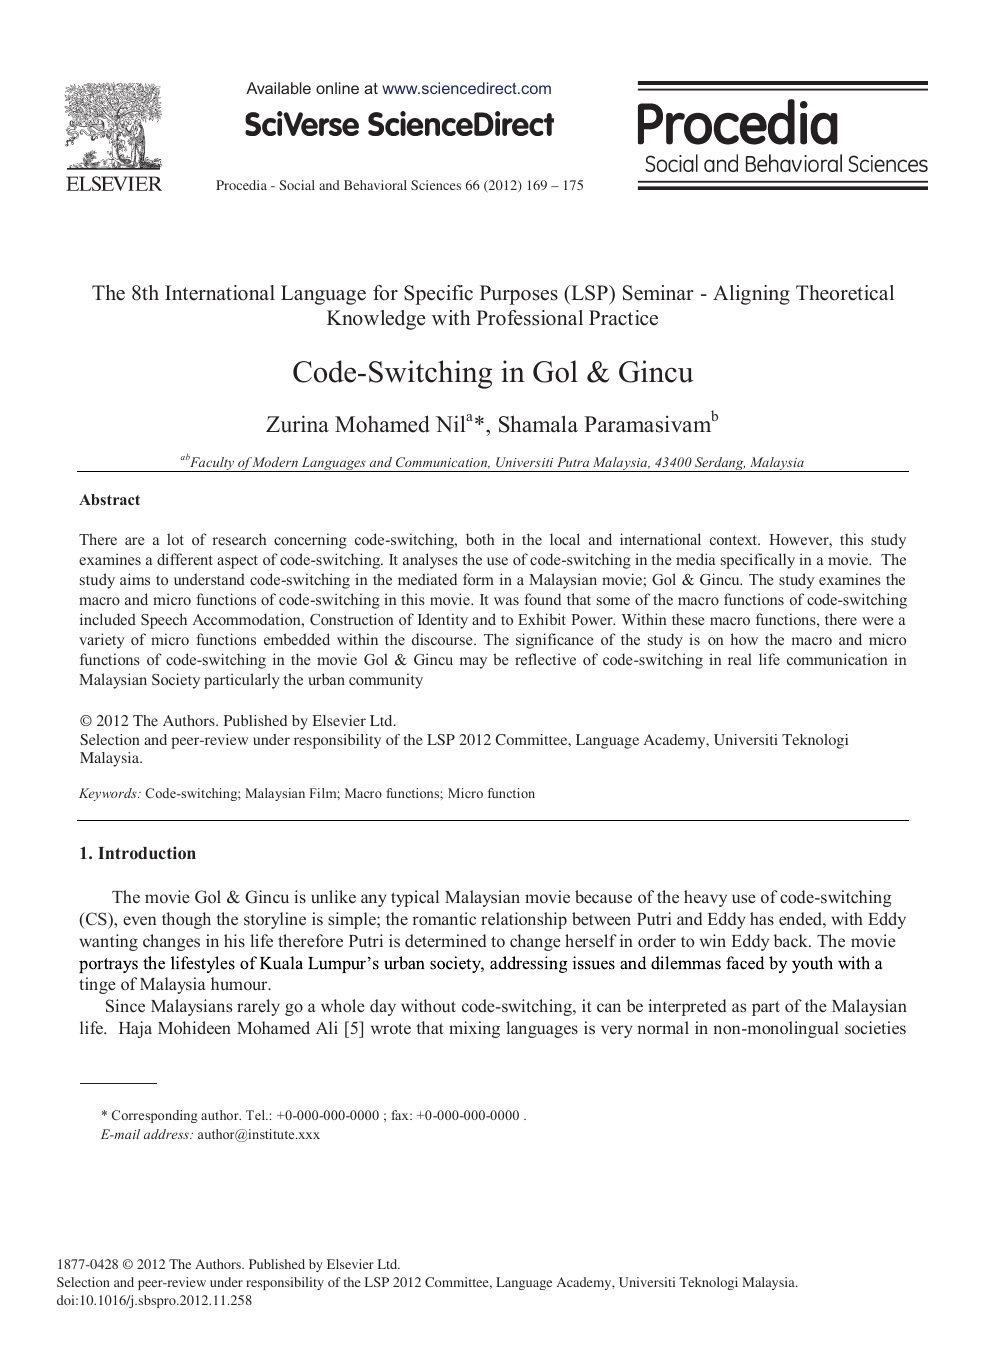 Code Switching In Gol Gincu Topic Of Research Paper In Civil Engineering Download Scholarly Article Pdf And Read For Free On Cyberleninka Open Science Hub